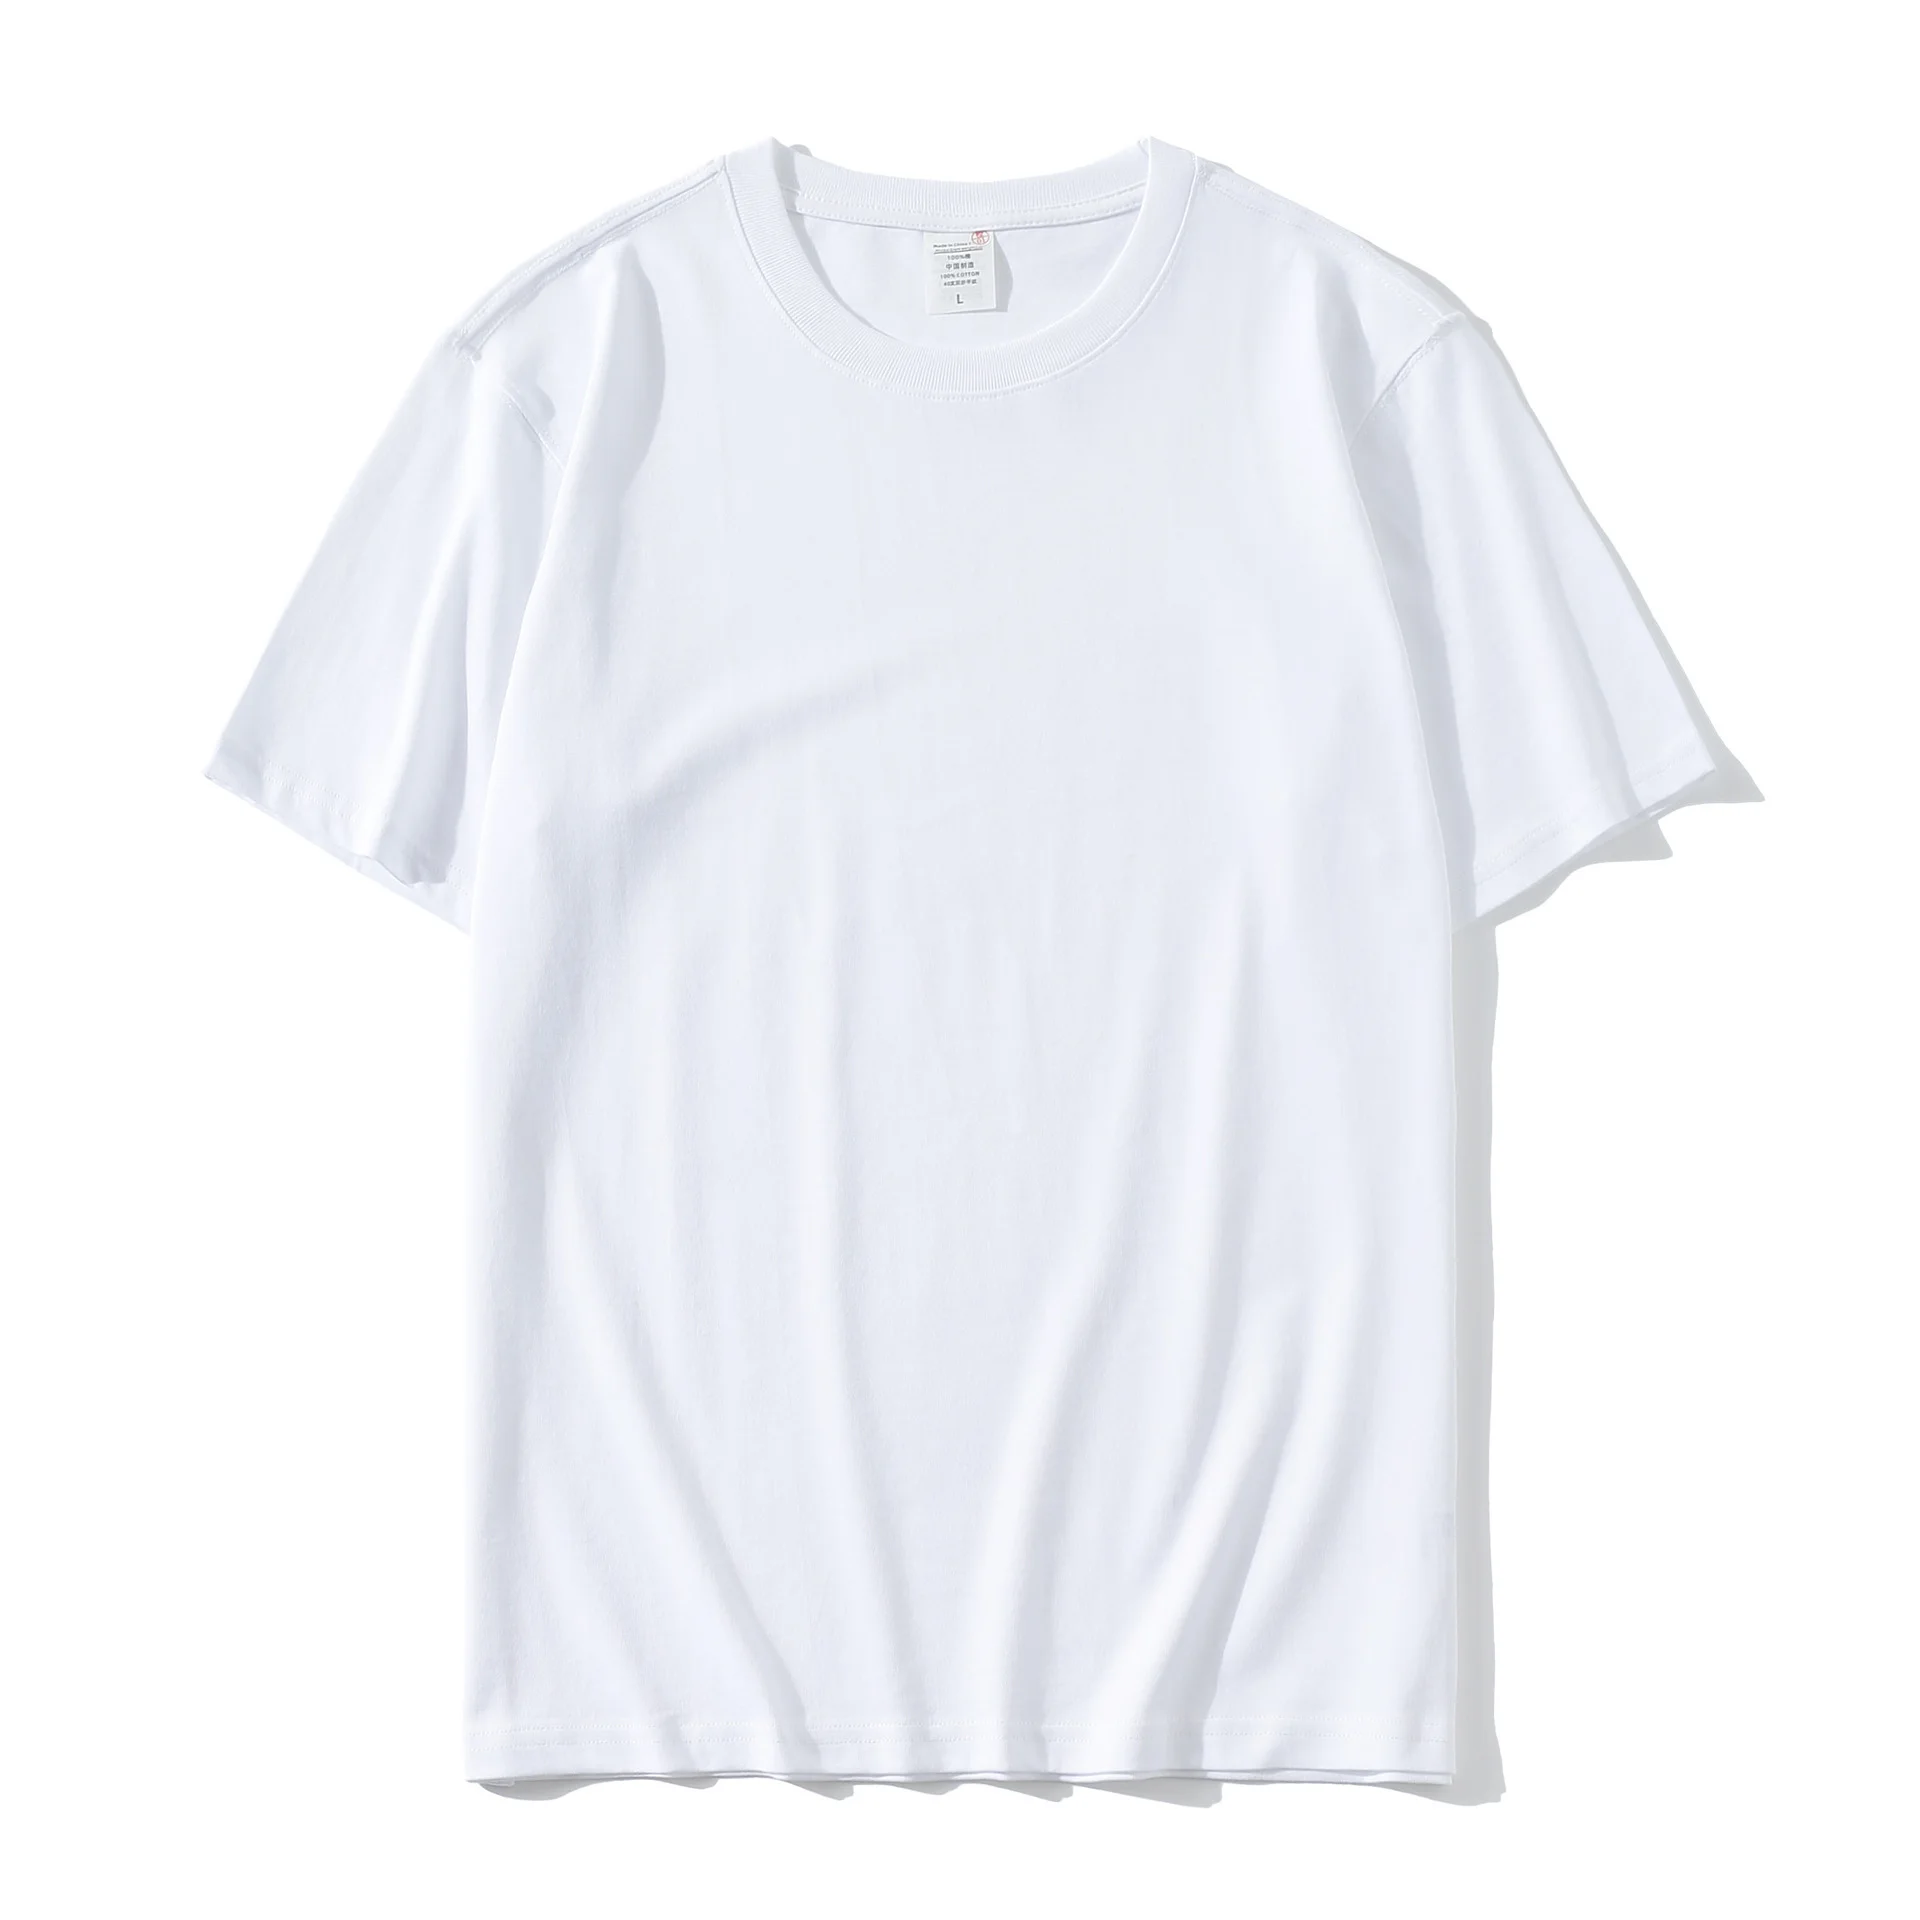 Wholesale Blank T shirts for Printing in Iceland